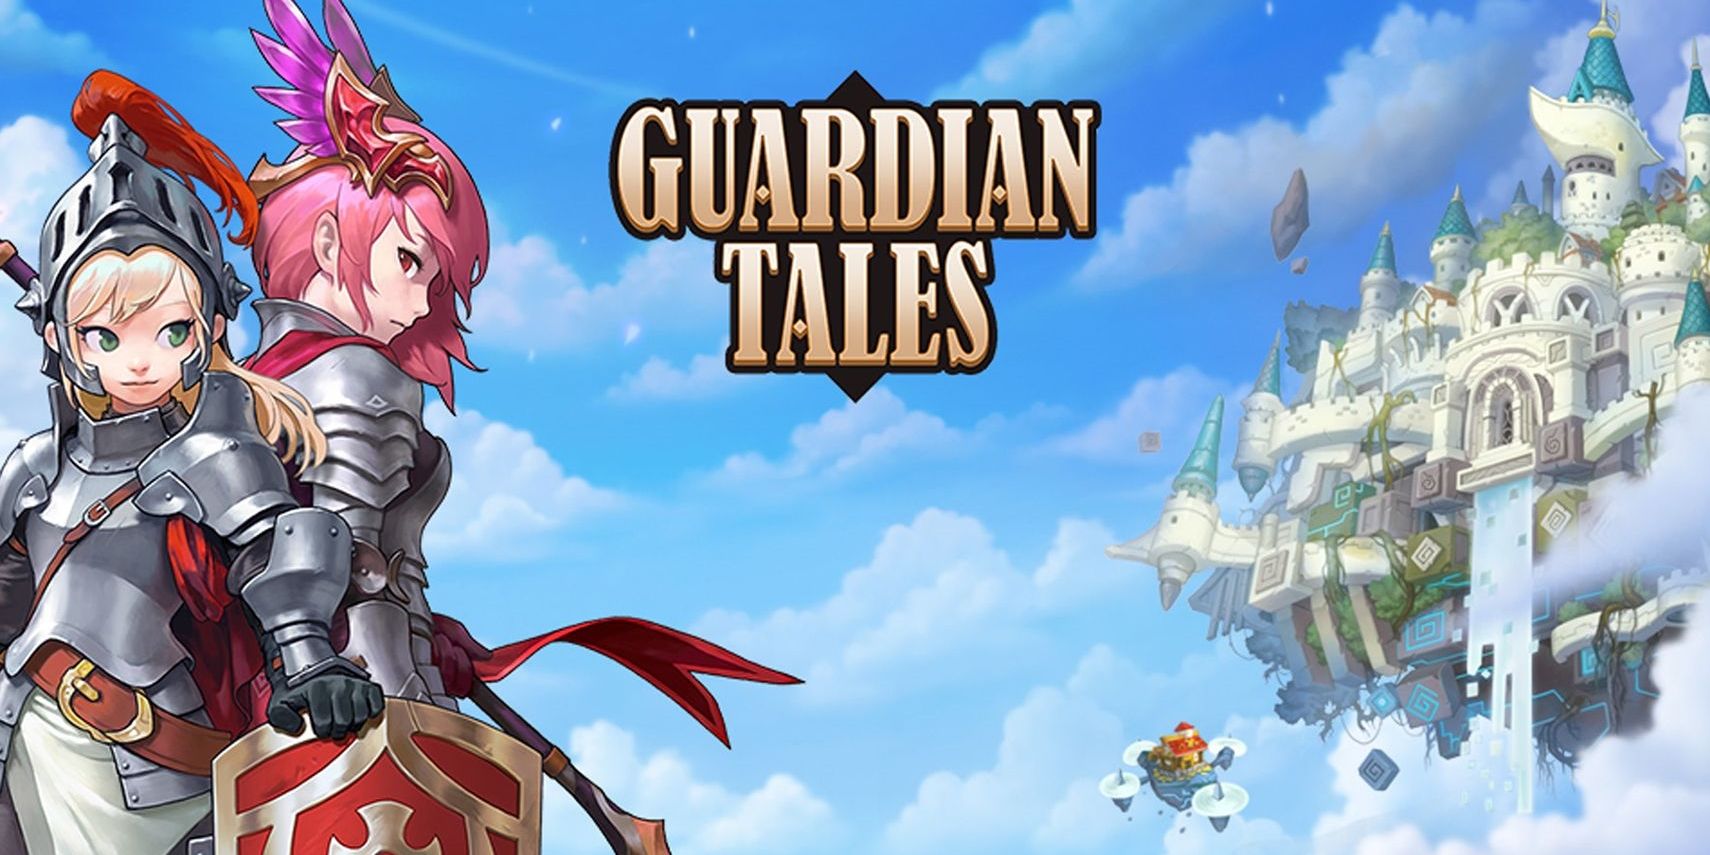 Guardian Tales Cover with two knights standing back to back across a floating castle